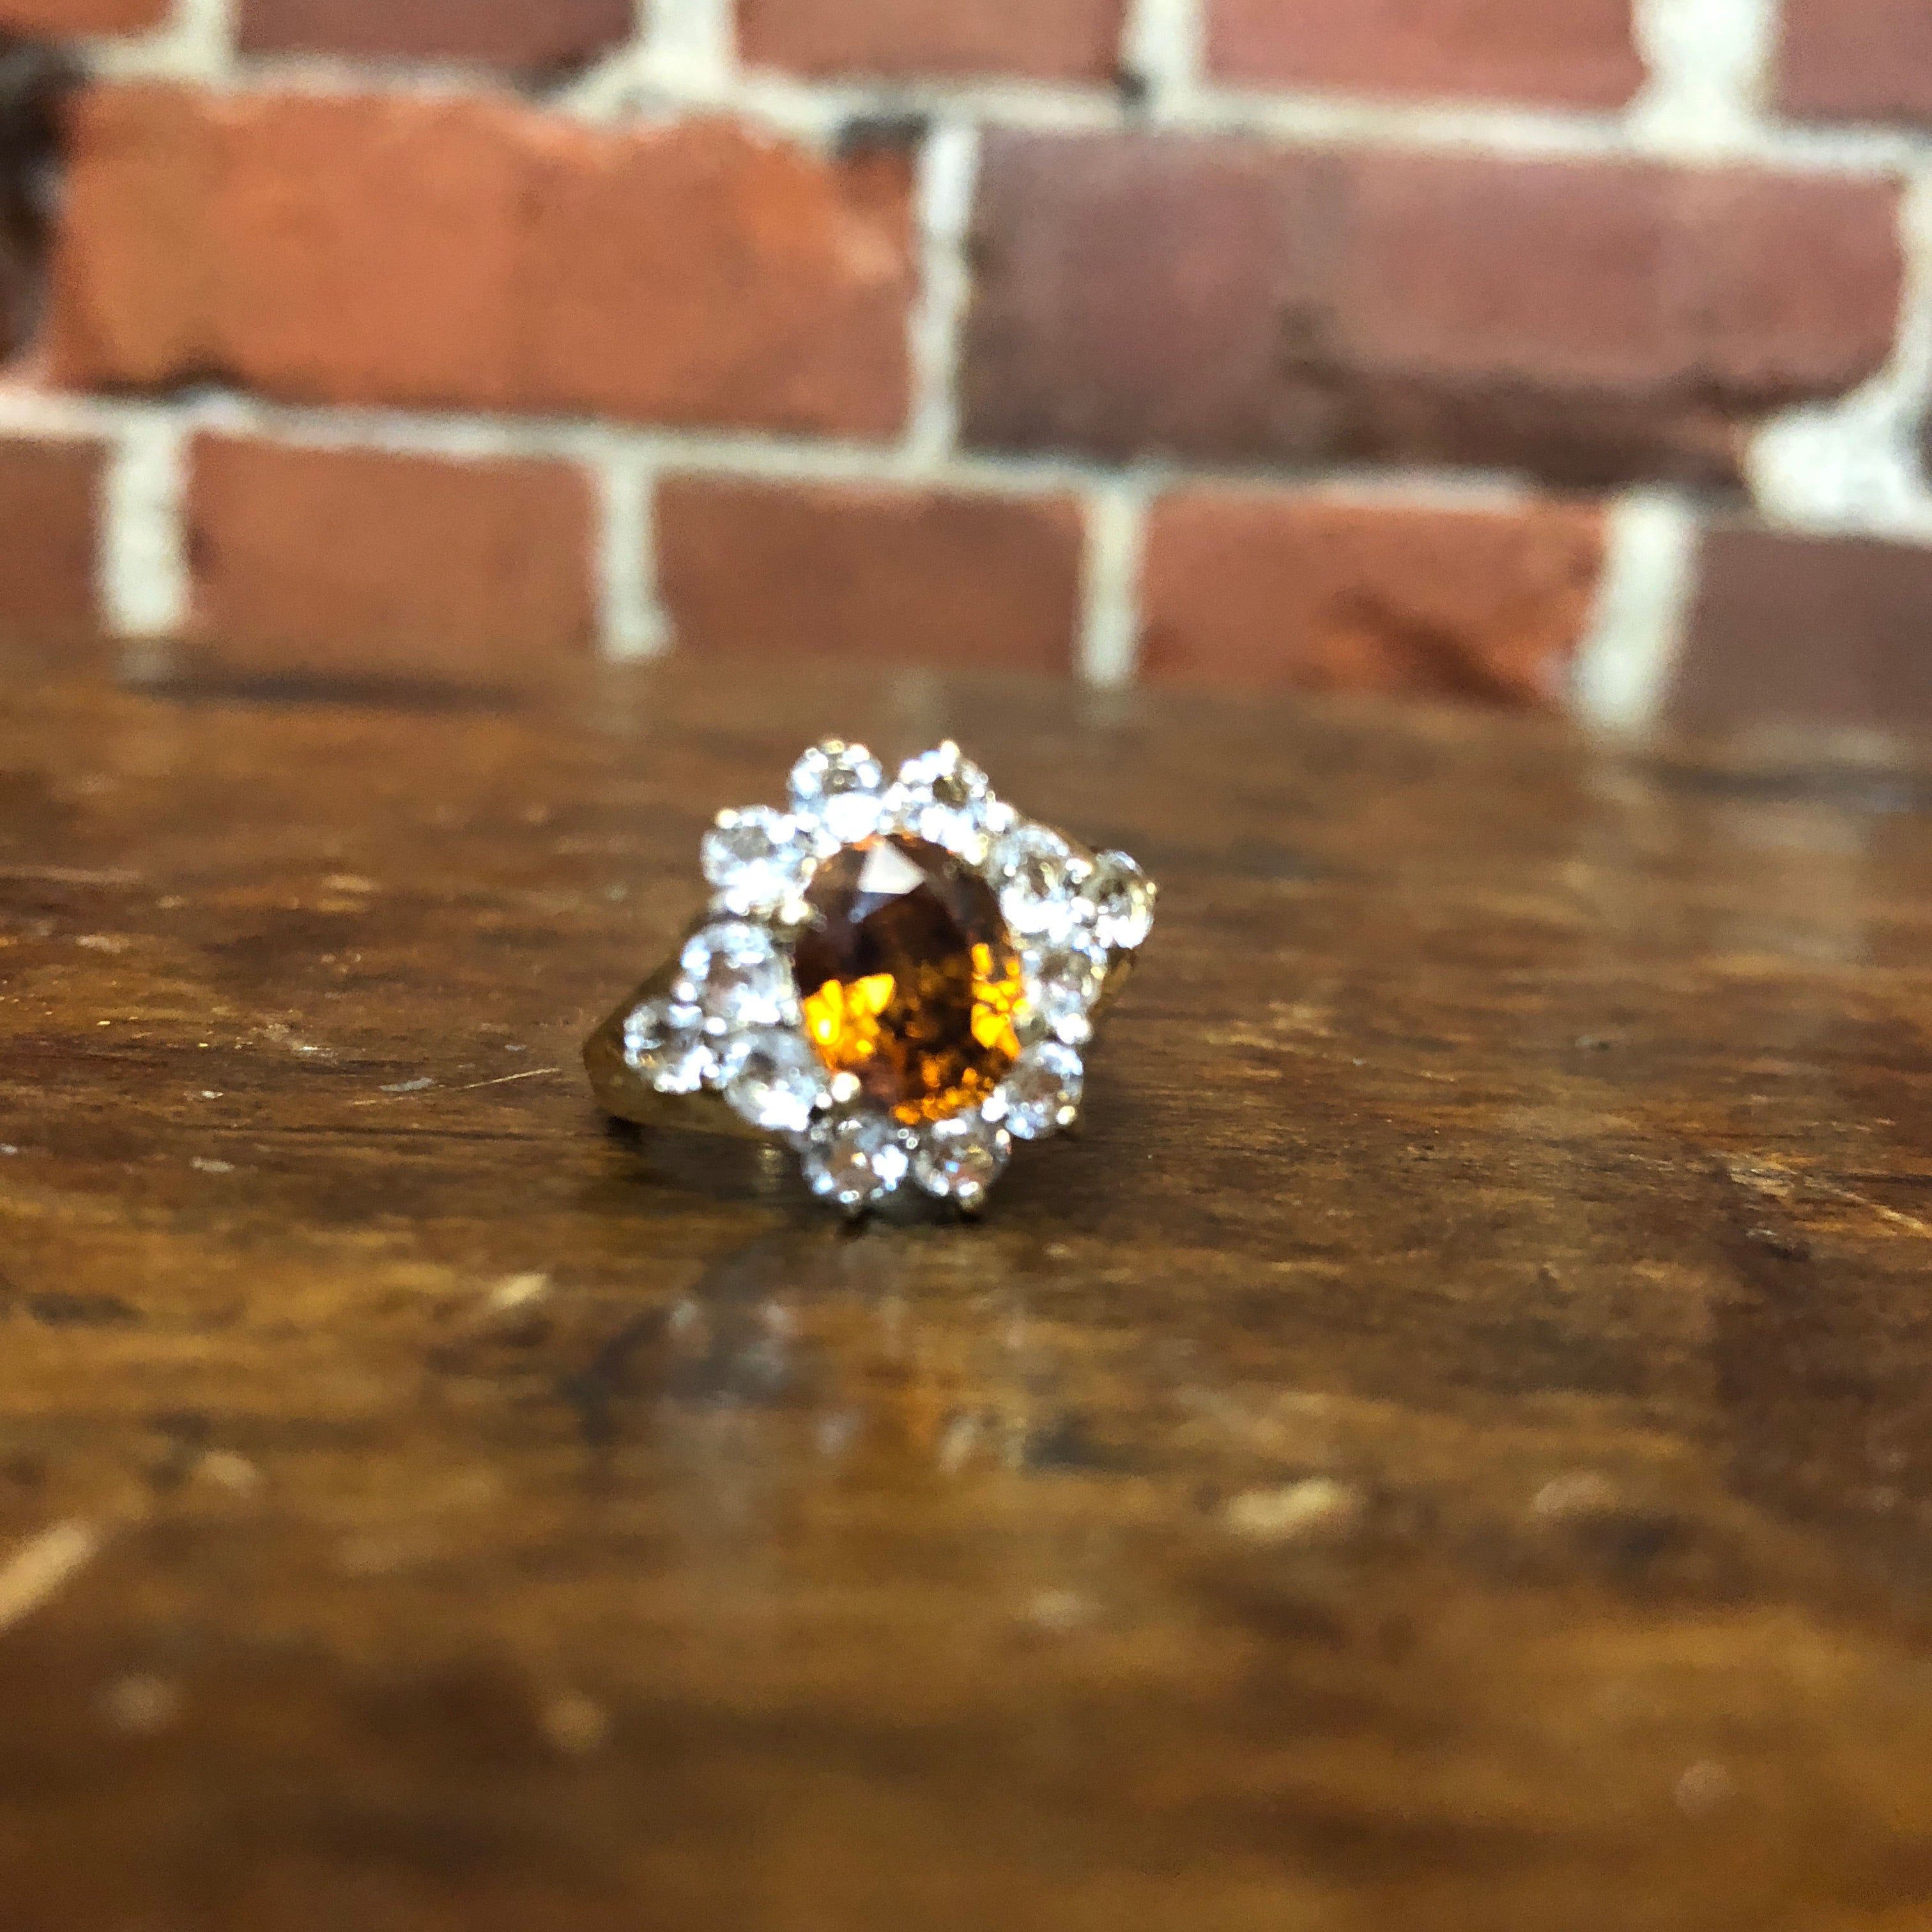 9ct gold, garnet and white sapphires ring